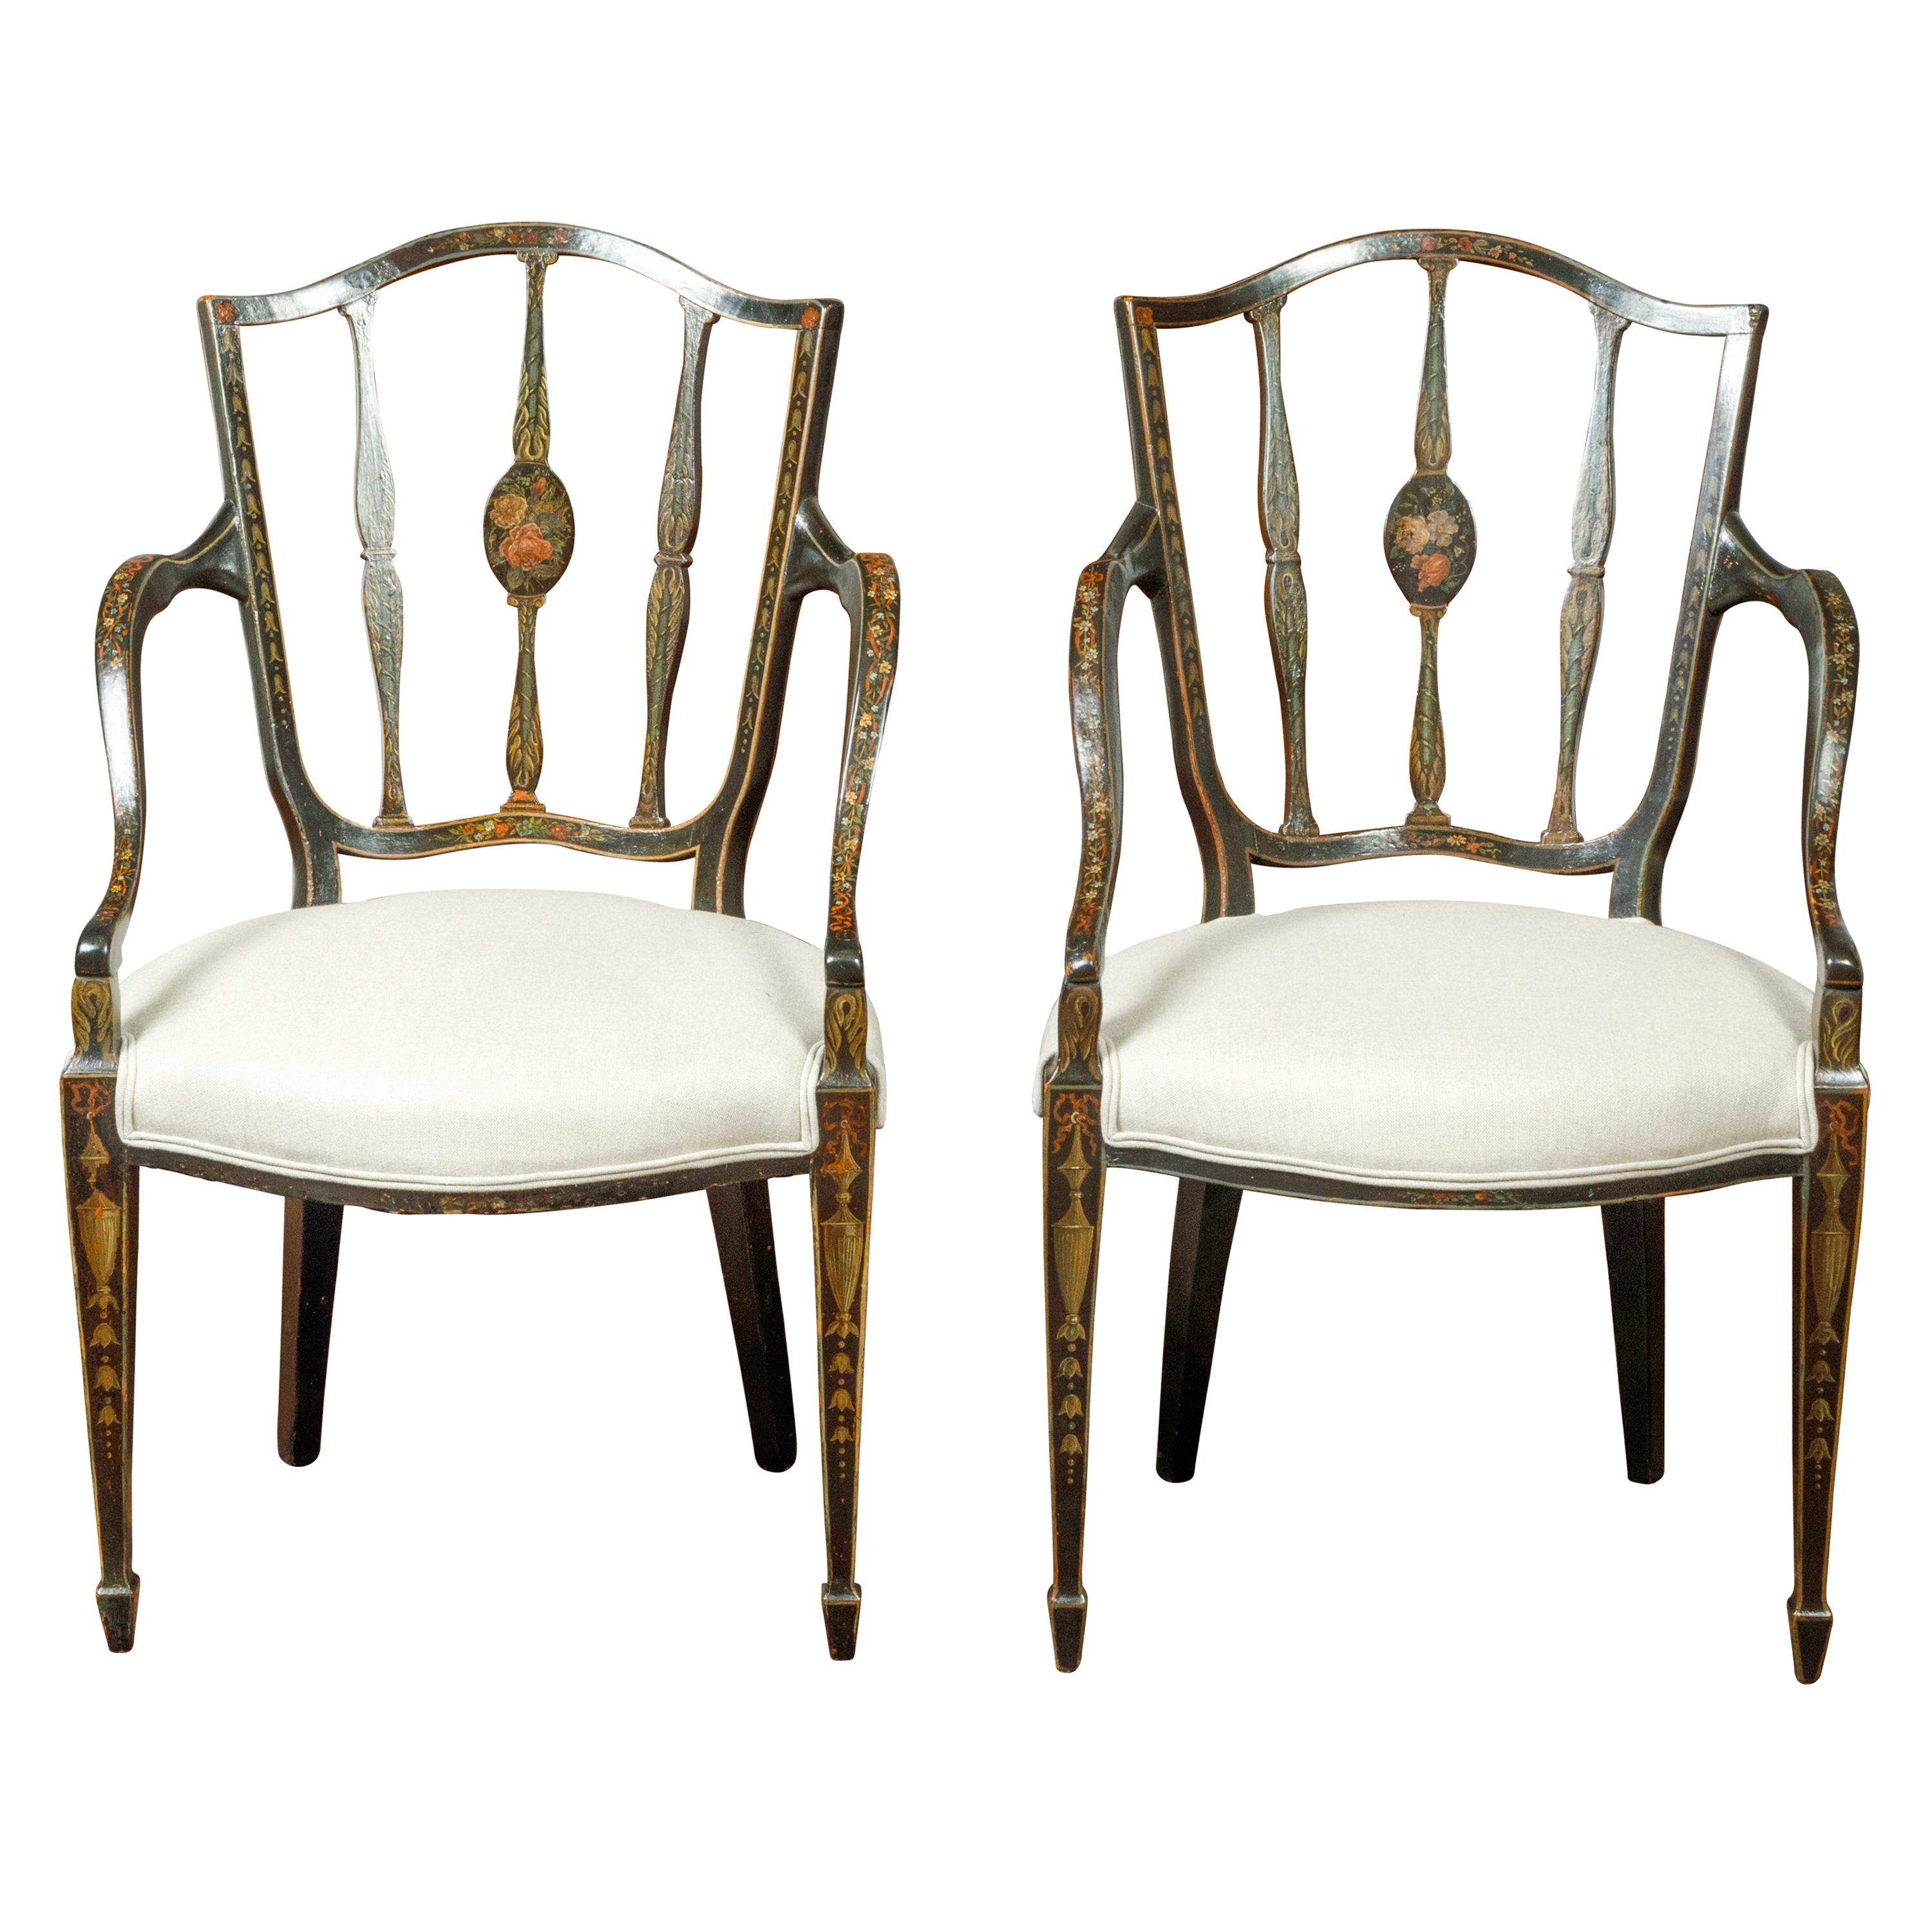 Pair of English Upholstered Armchairs with Hand-Painted Foliage and Floral Décor For Sale